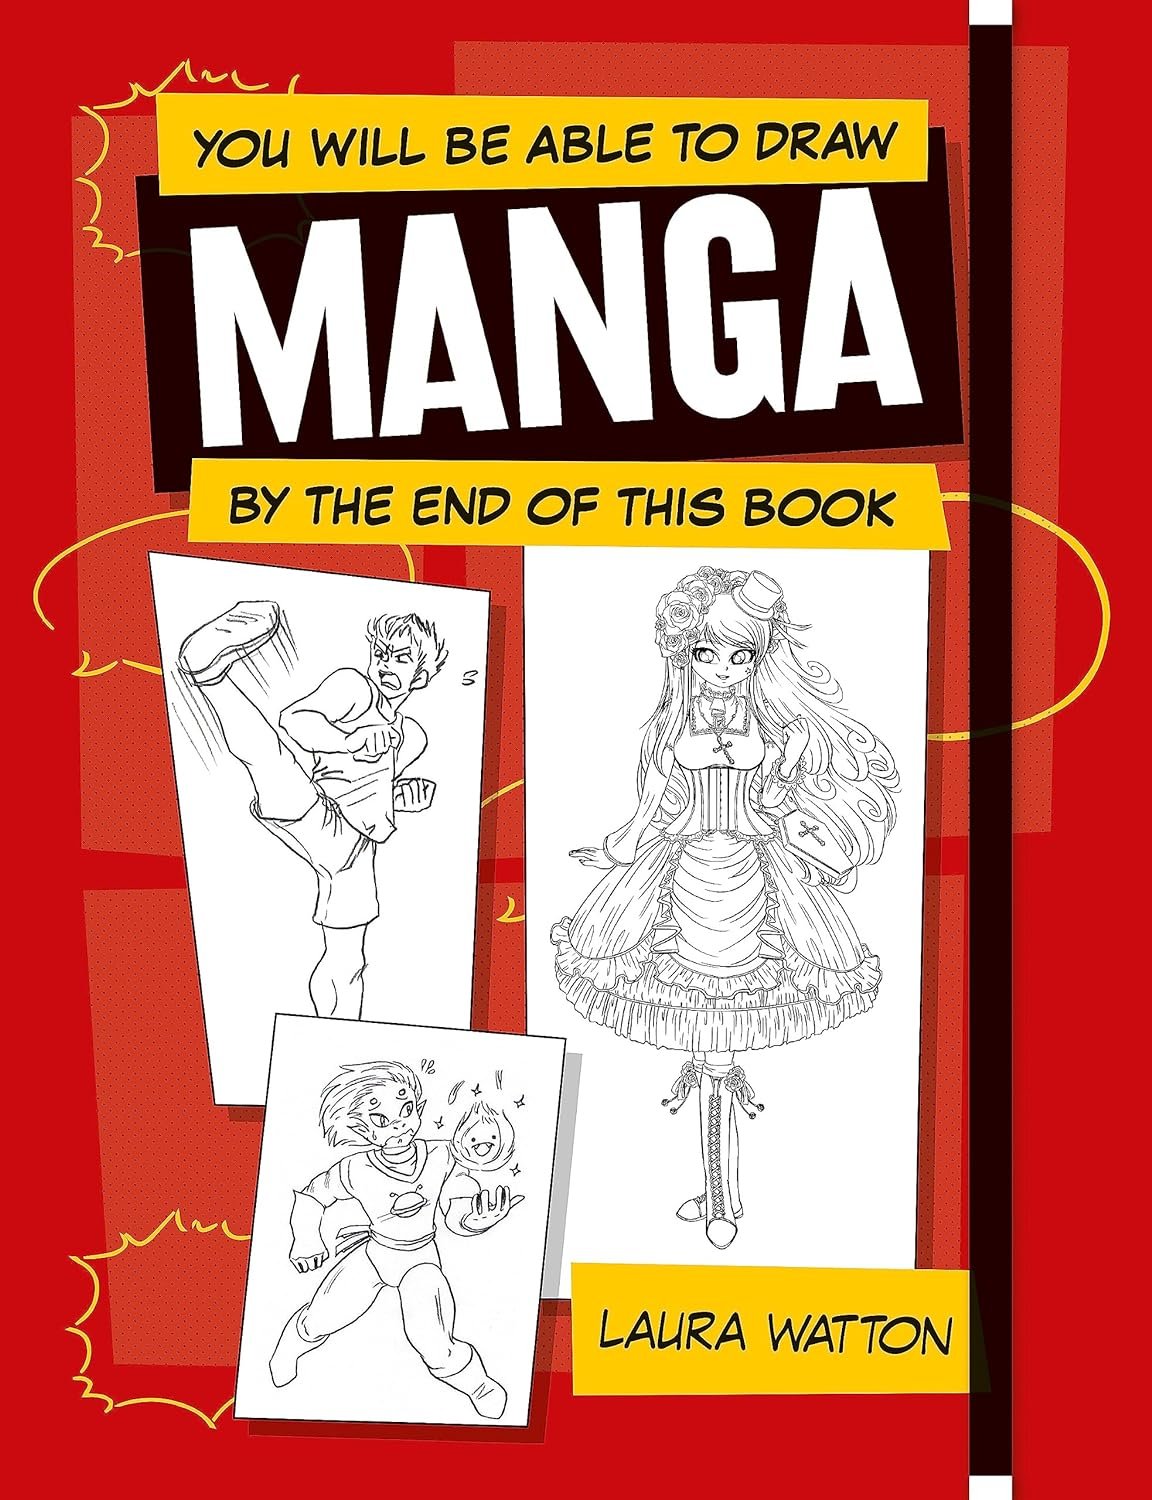 You Will Be Able to Draw Manga by the End of This Book [UK]